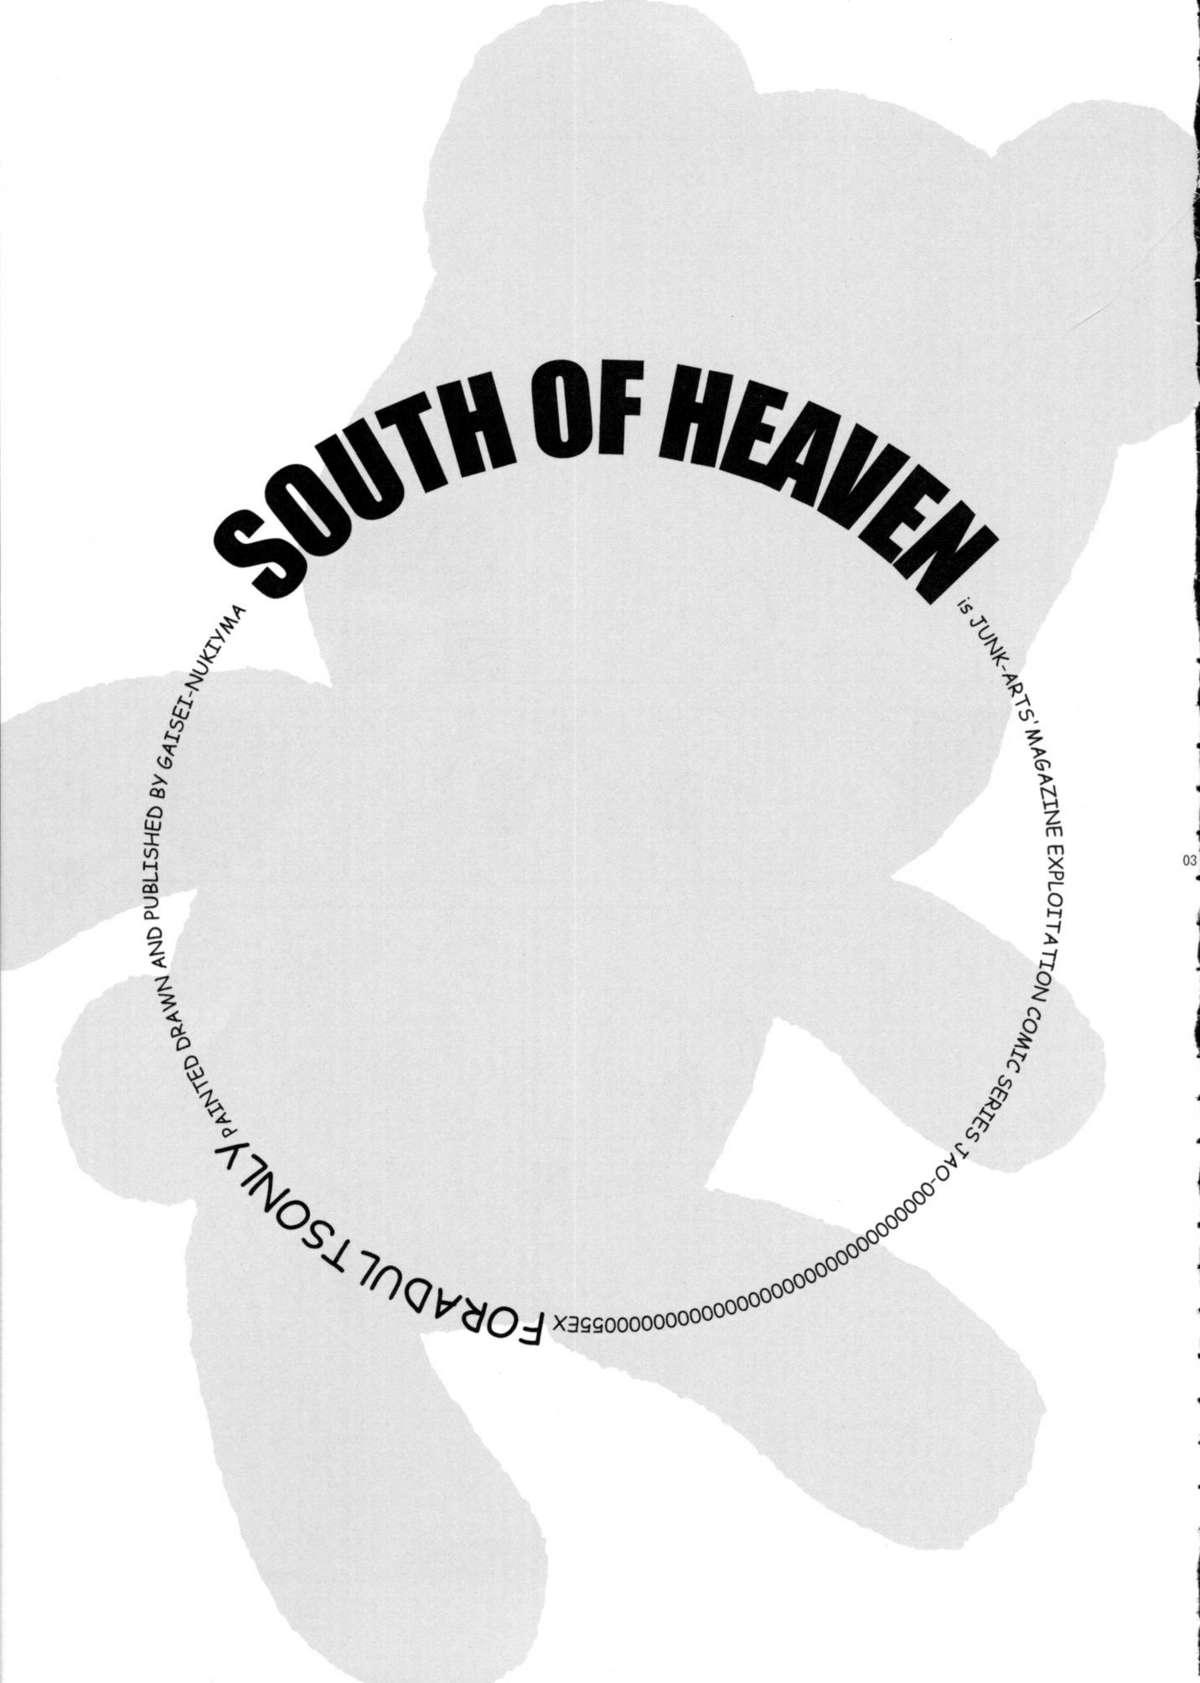 SOUTH OF HEAVEN 1